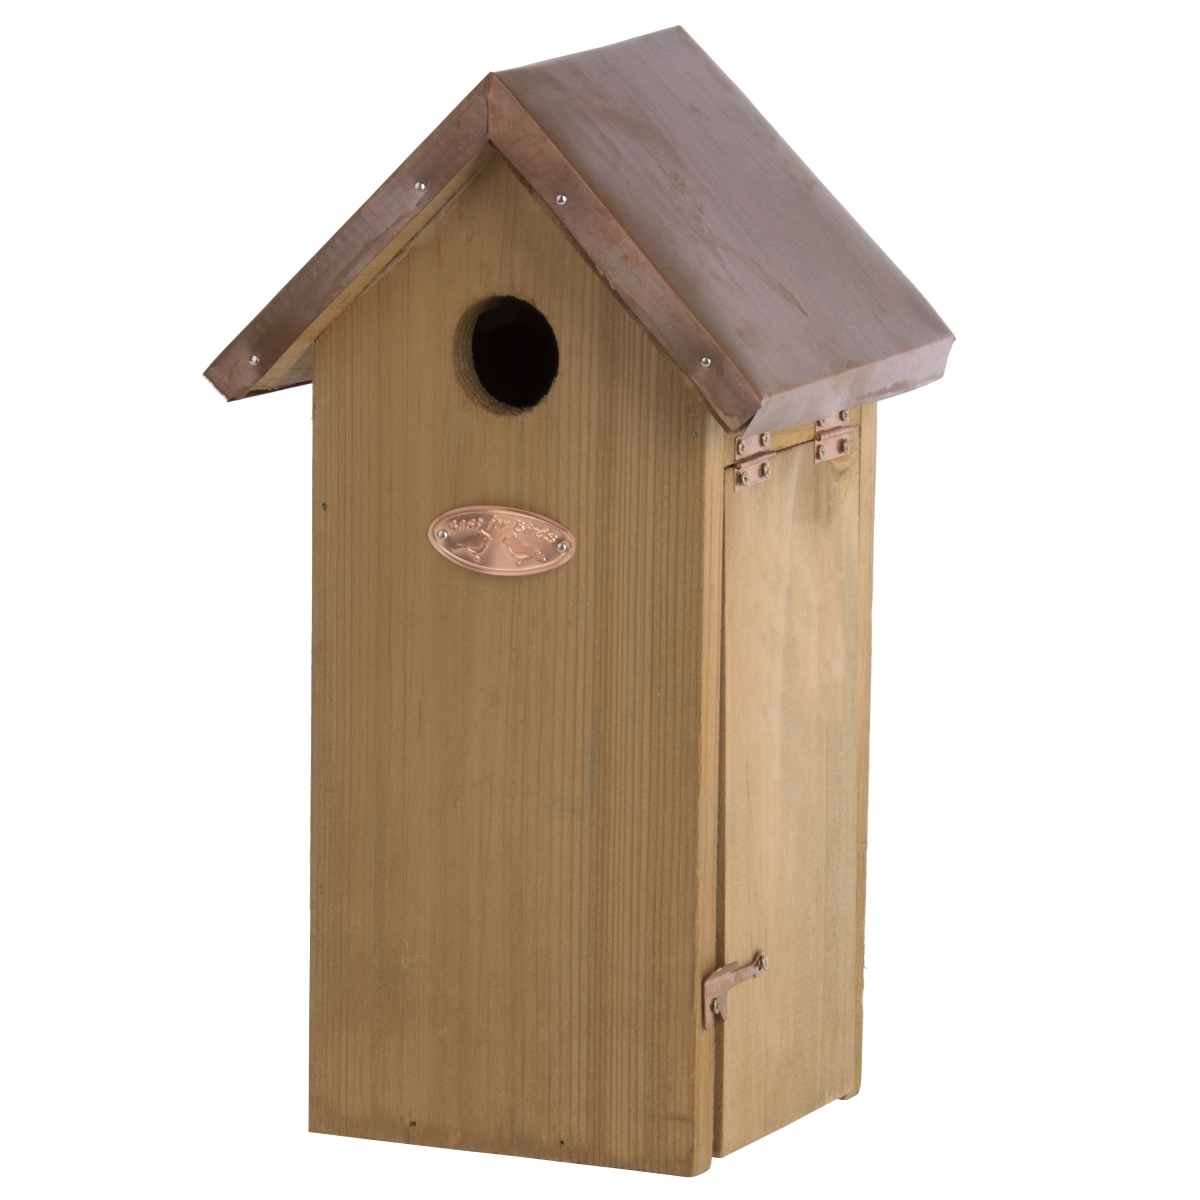 Picture of Esschert Design NK04 Antique Wash Wood Great Tit Bird House with Copper Roof